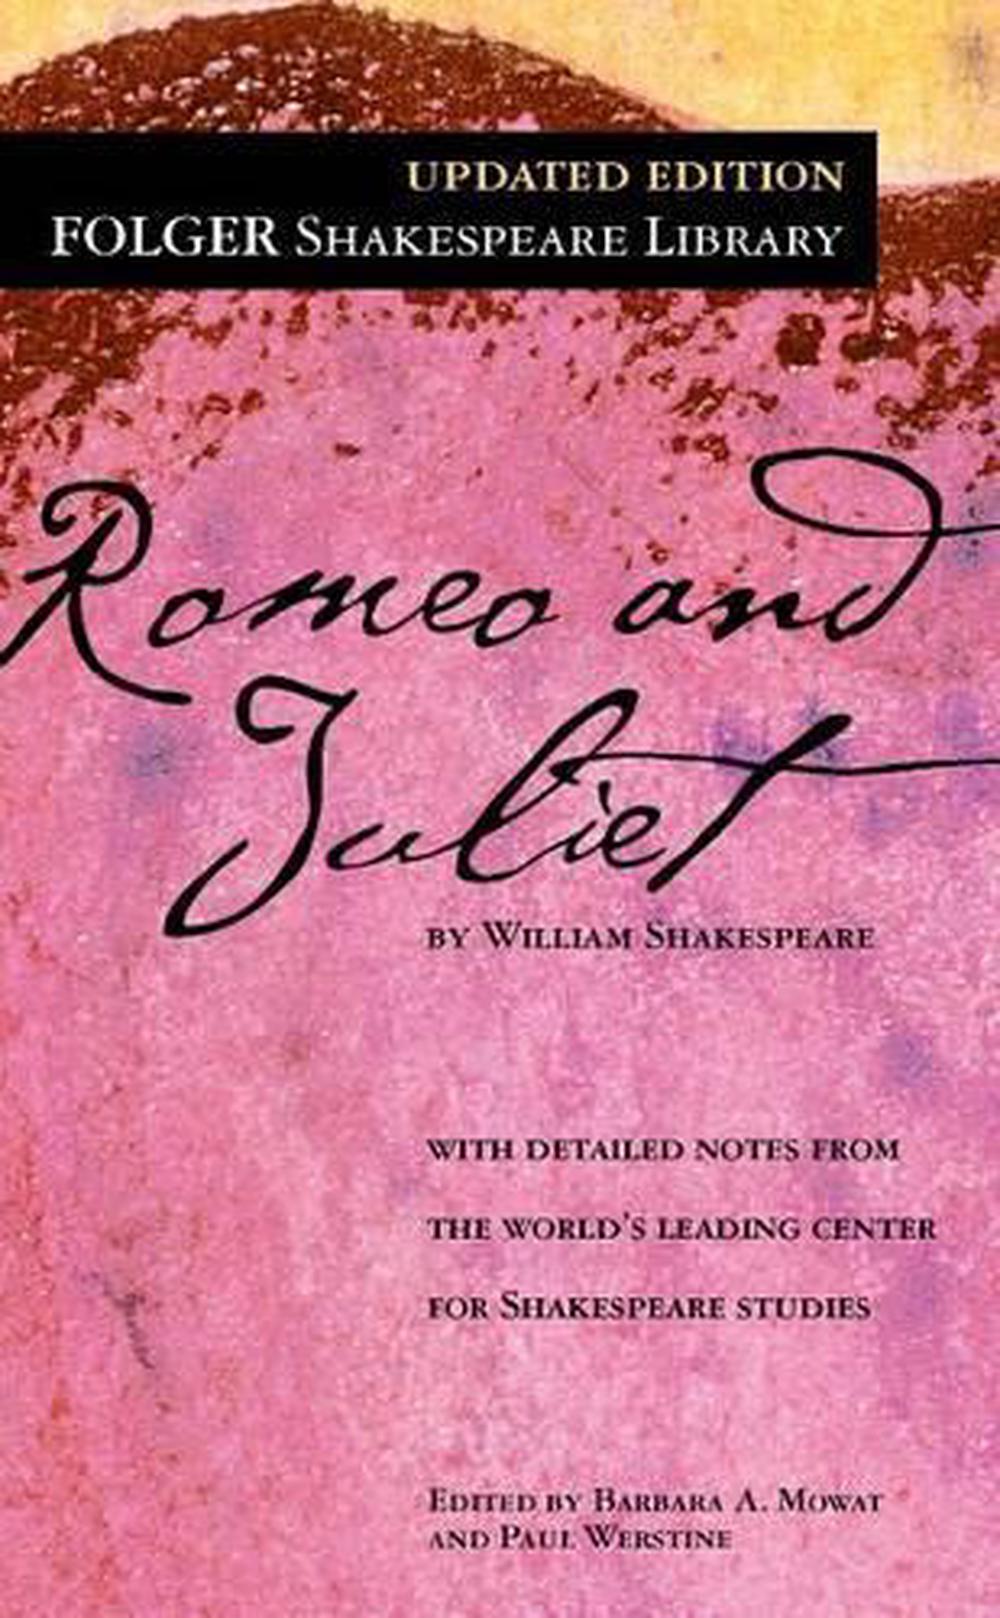 william shakespeare romeo and juliet book play script